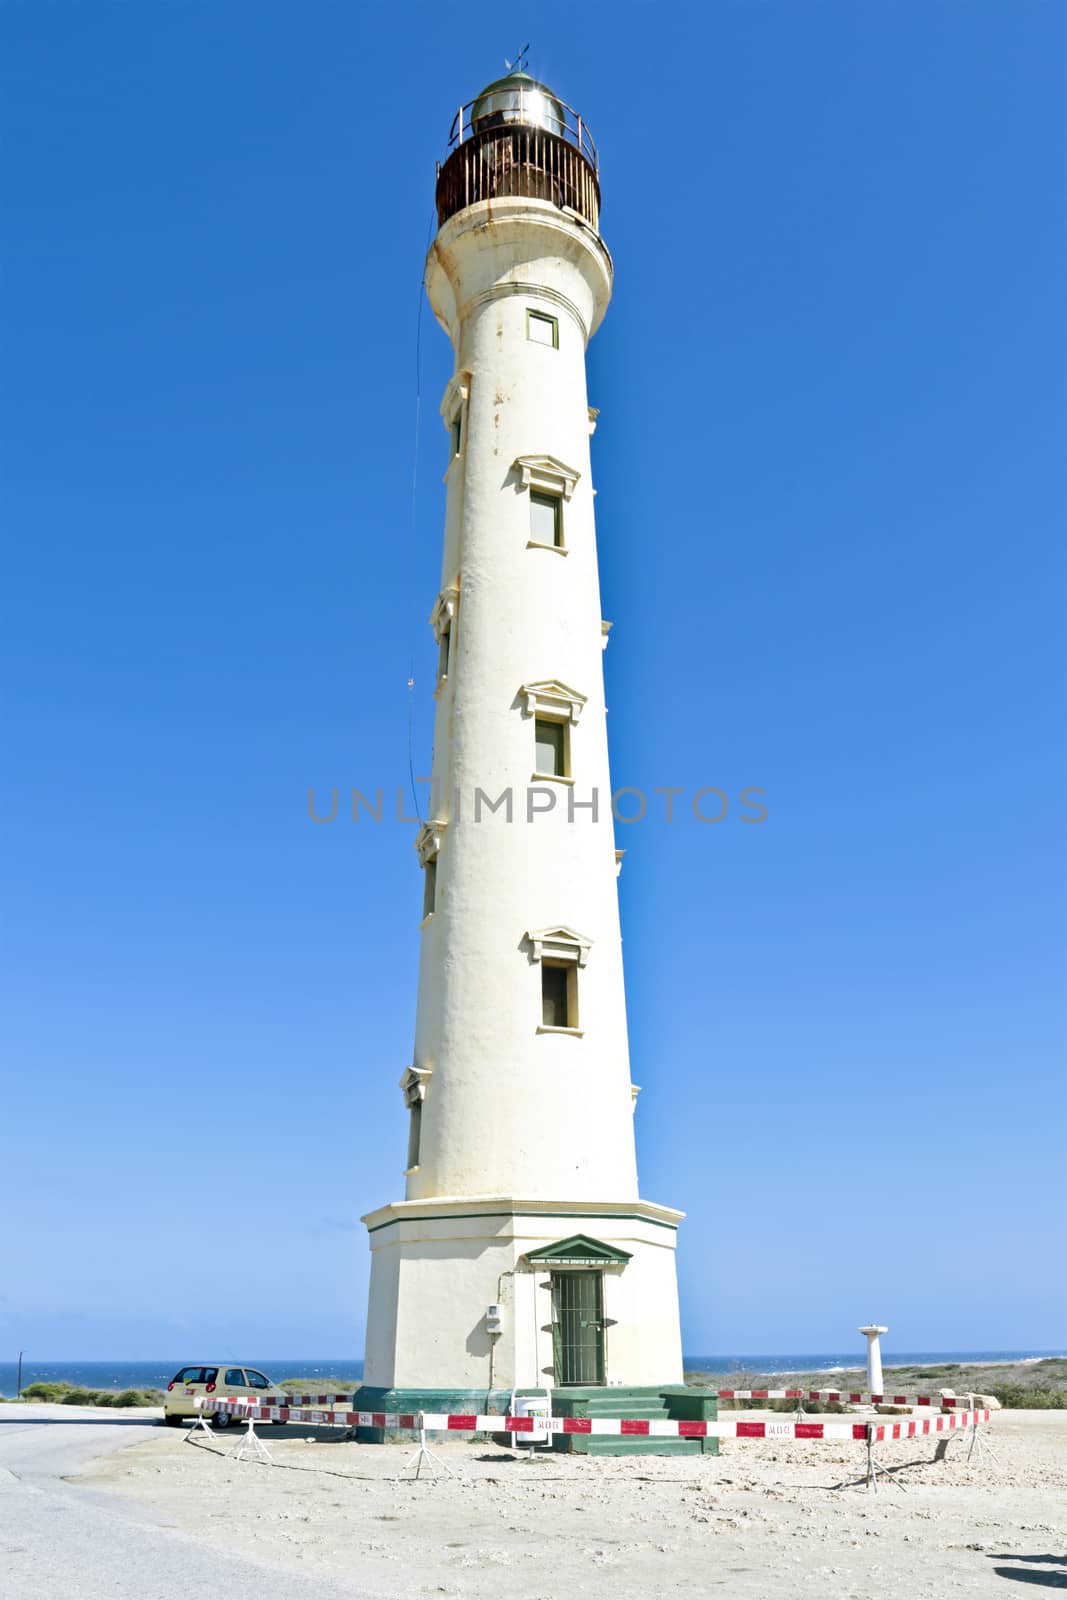 California lighthouse from Aruba by devy